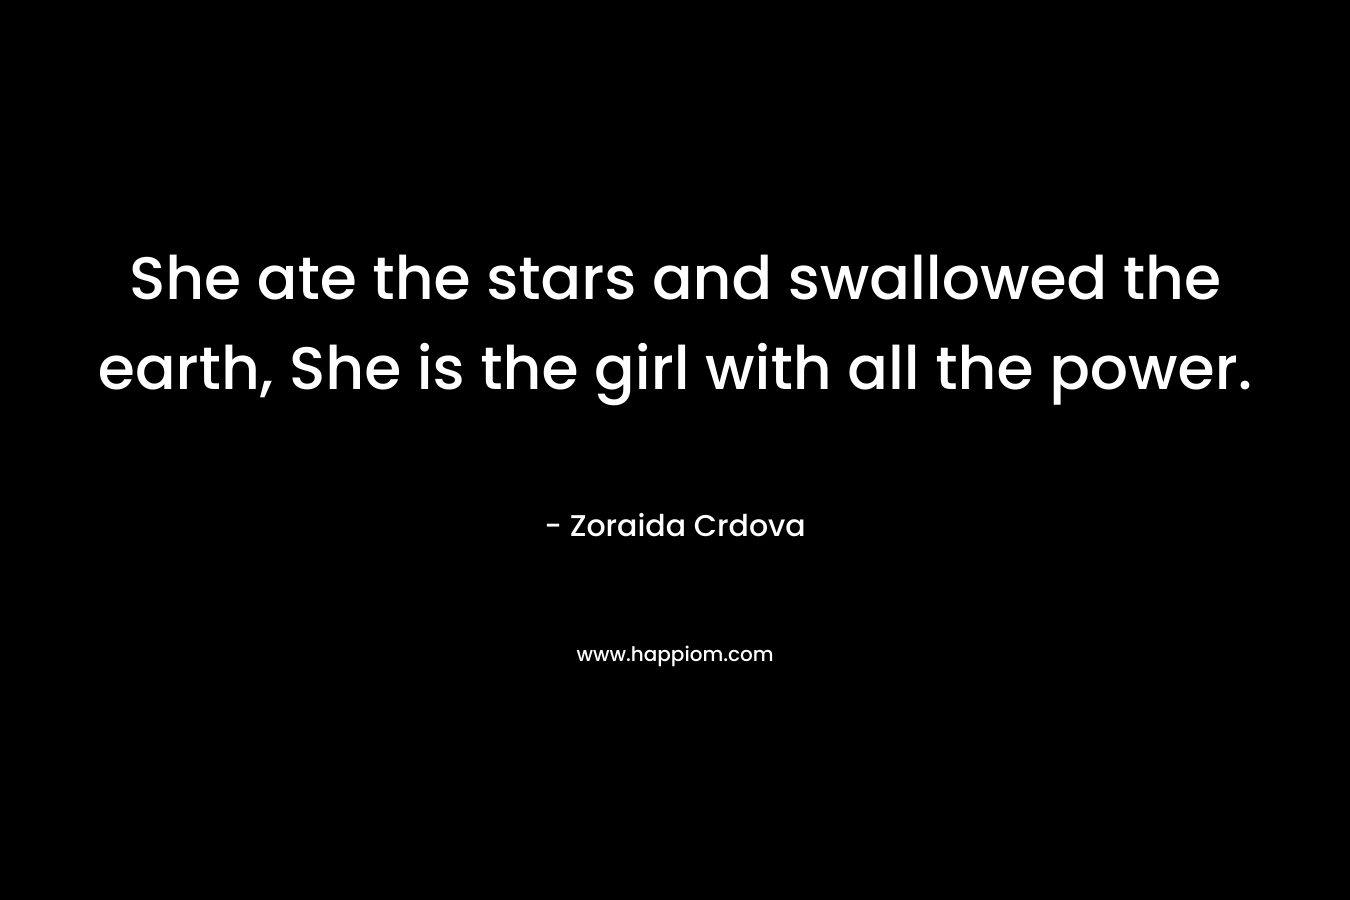 She ate the stars and swallowed the earth, She is the girl with all the power. – Zoraida Crdova